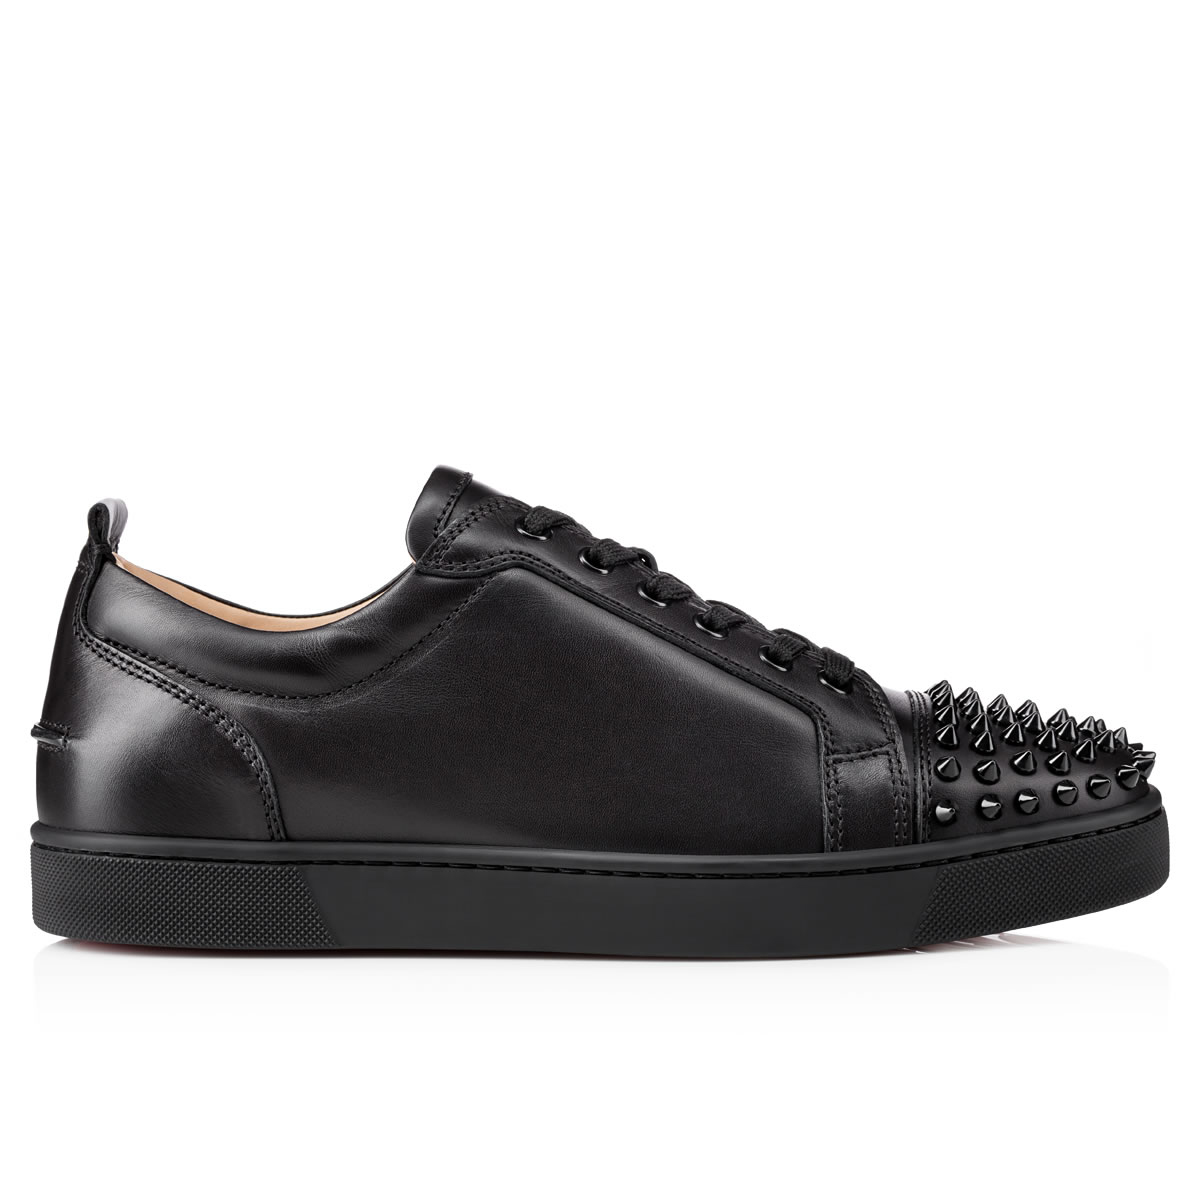 Louis Junior Spikes - Calf leather and spikes - Christian Louboutin